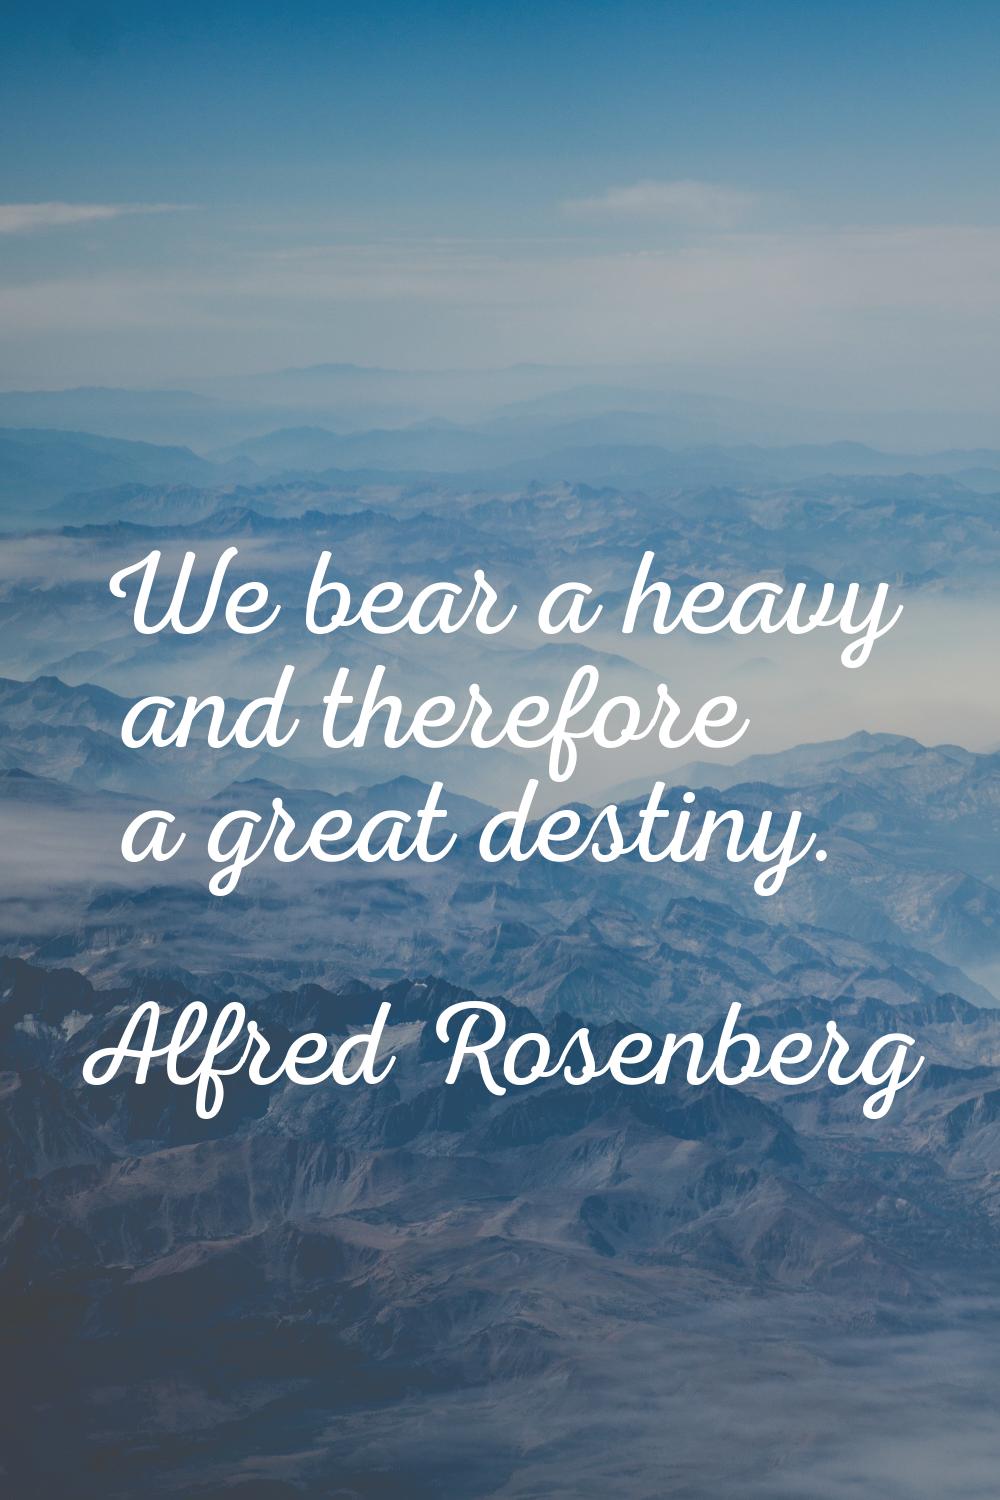 We bear a heavy and therefore a great destiny.